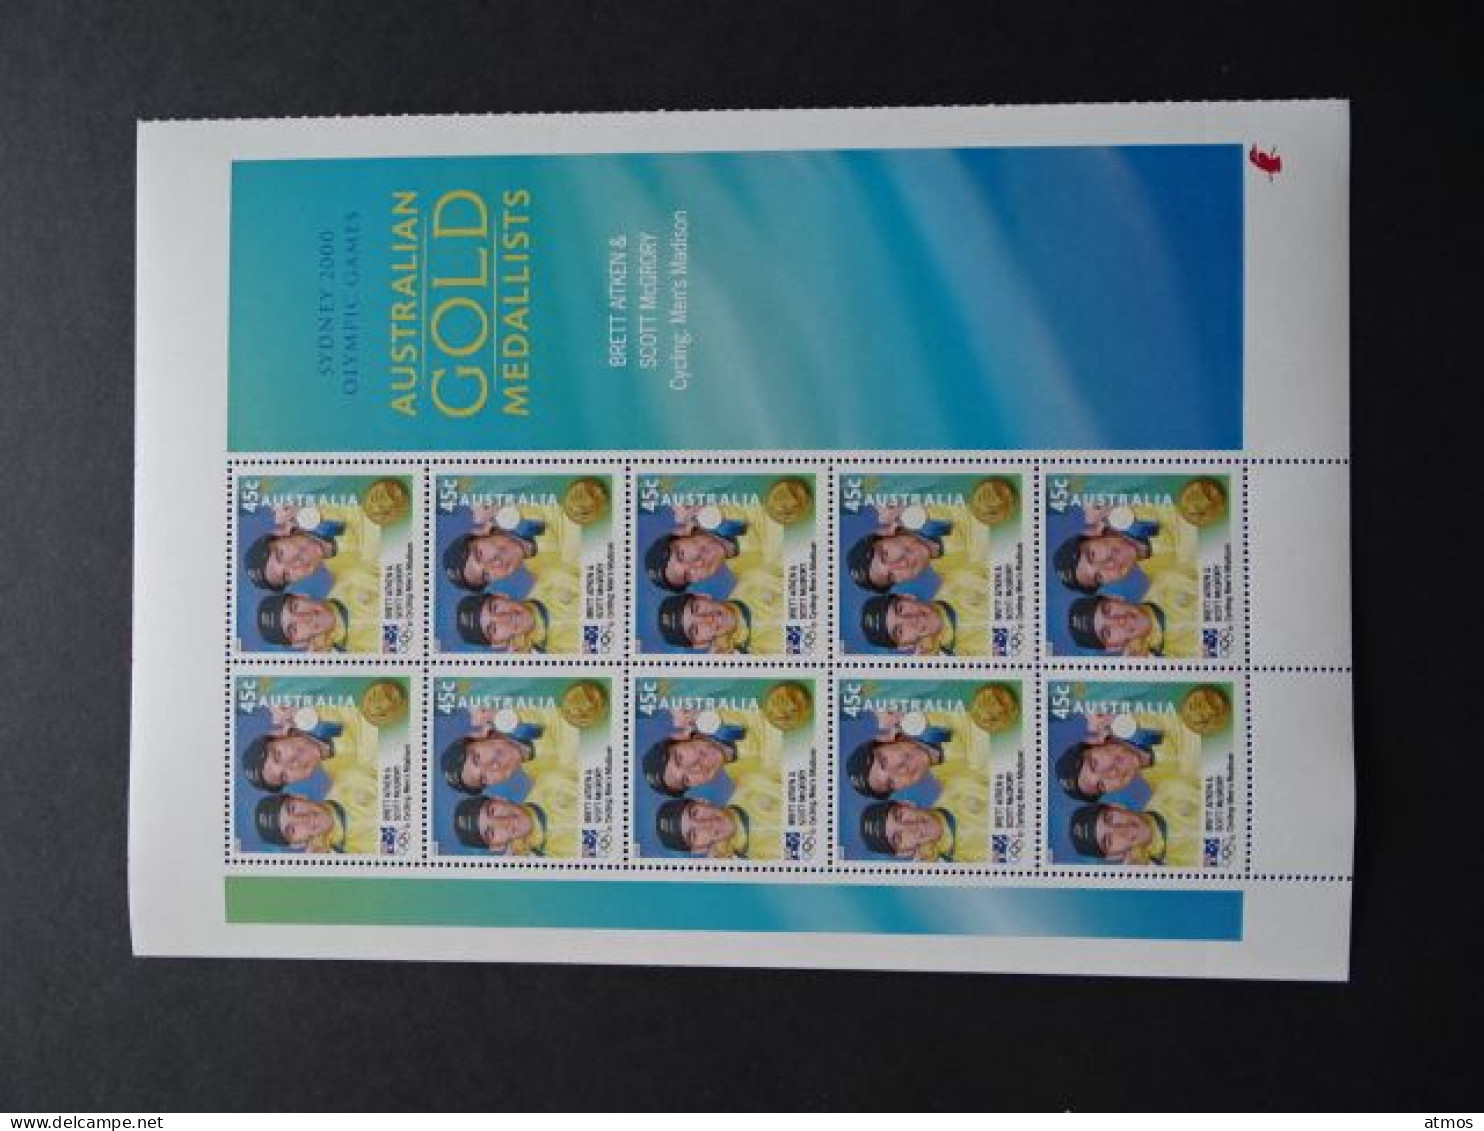 Australia MNH Michel Nr 1980 Sheet Of 10 From 2000 ACT - Neufs